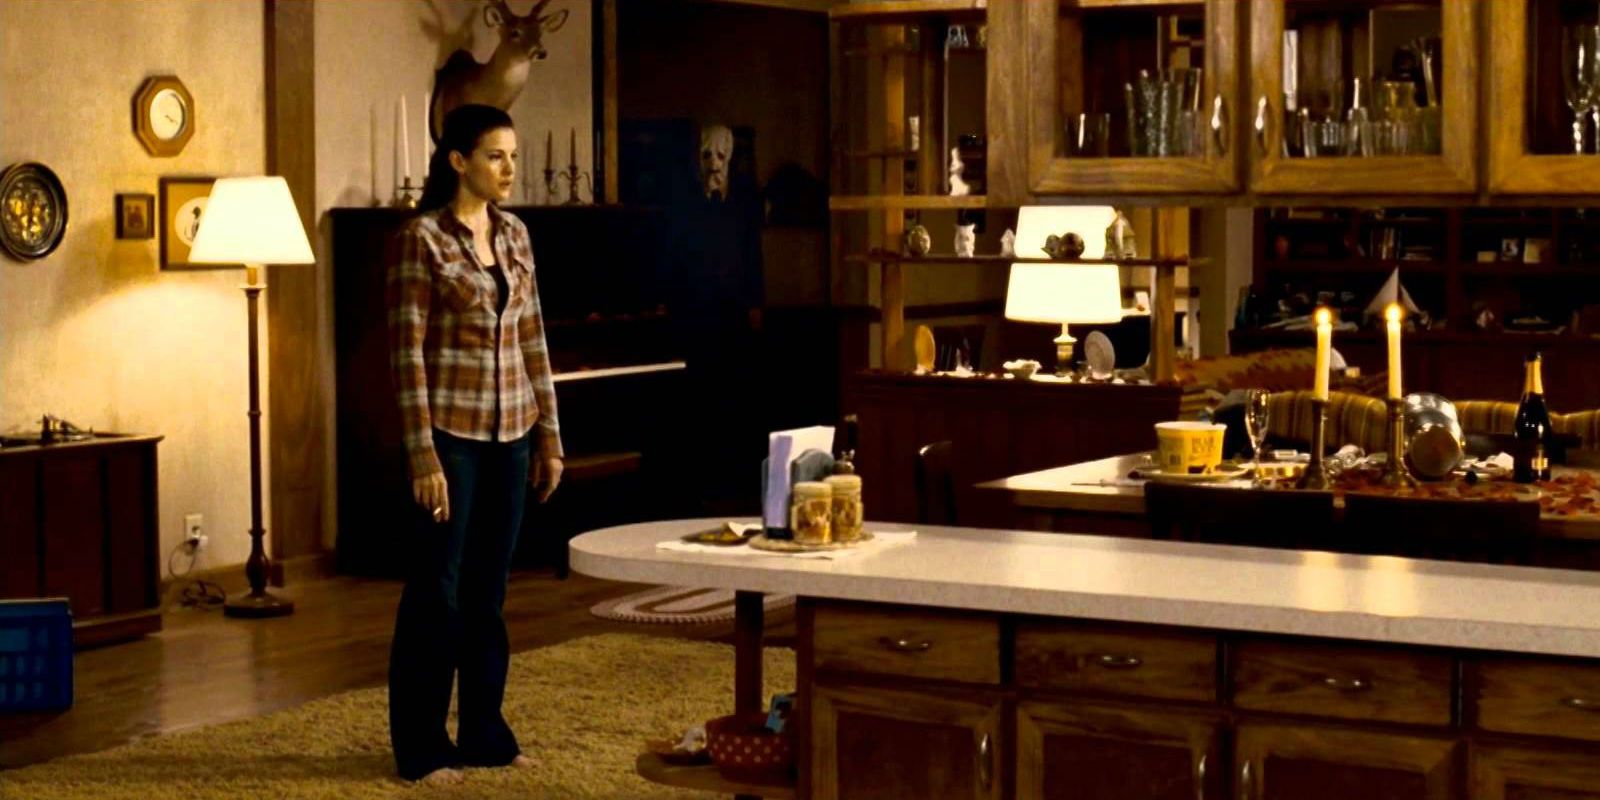 Liv Tyler with an intruder in the house in The Strangers